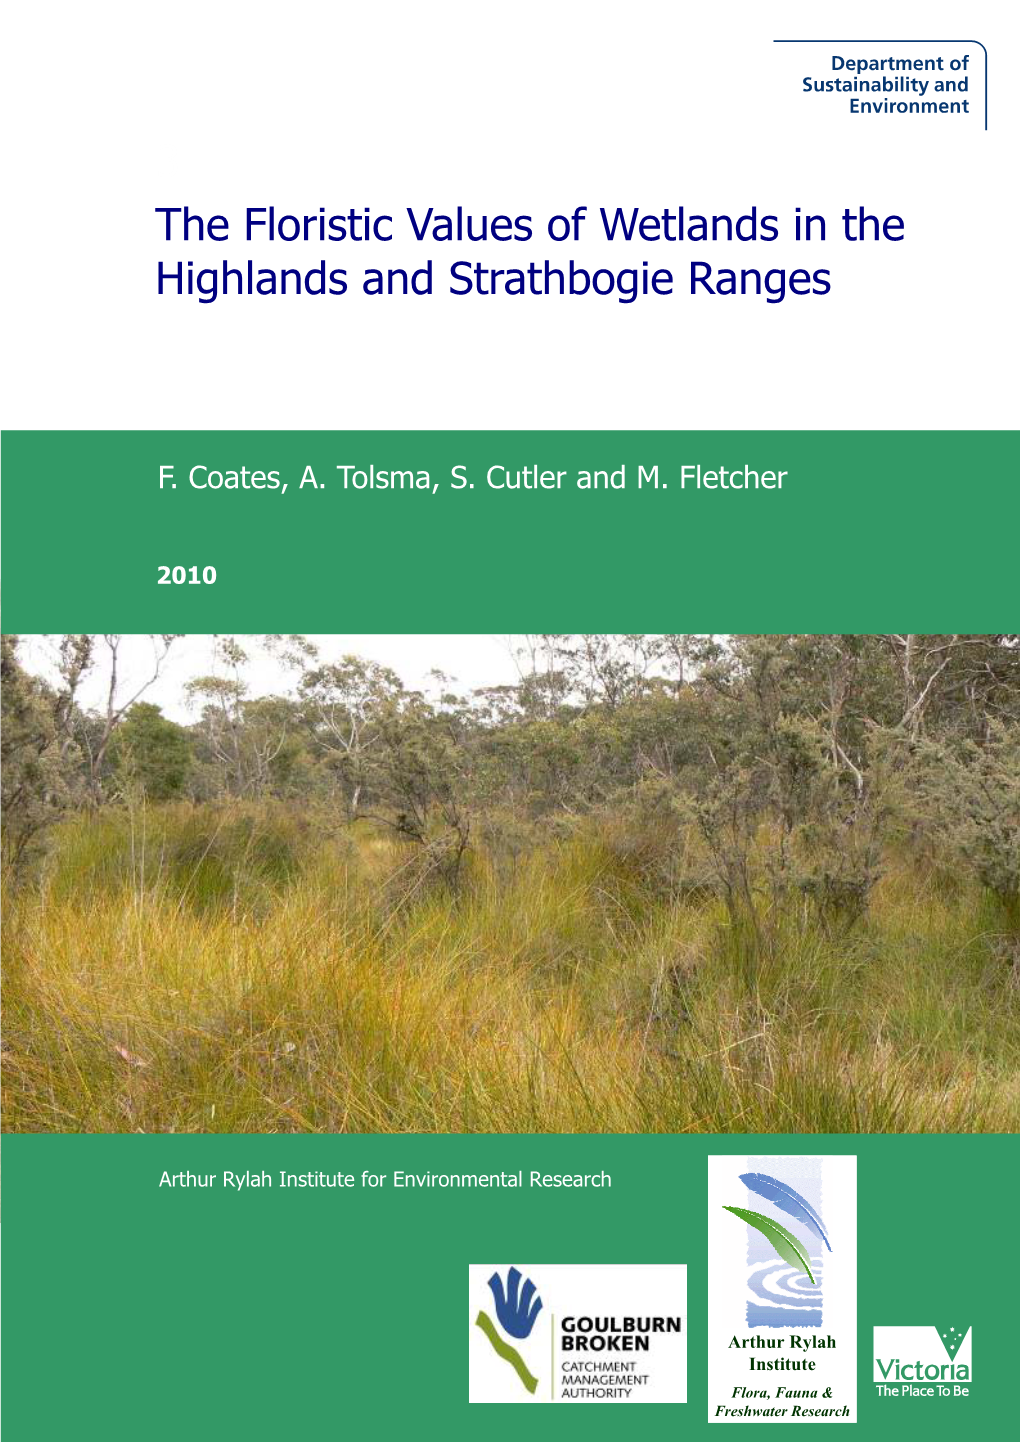 3 the Floristic Values of Wetlands in the Highlands and Strathbogie Ranges